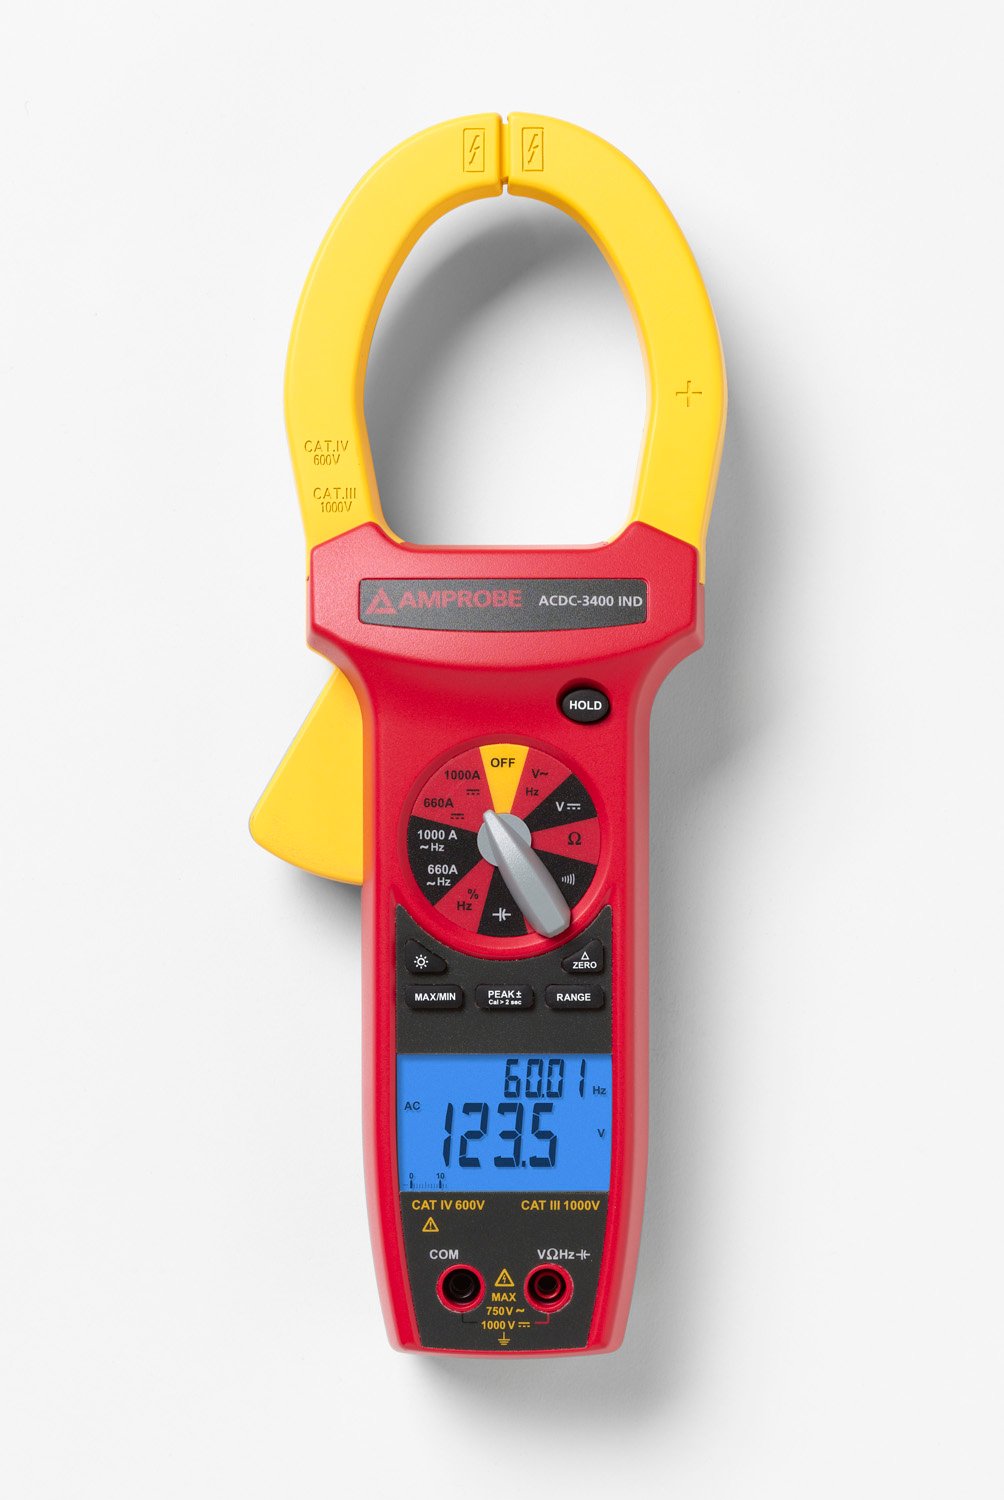 Amprobe ACDC-3400 IND CAT IV Industrial True RMS Clamp Meter